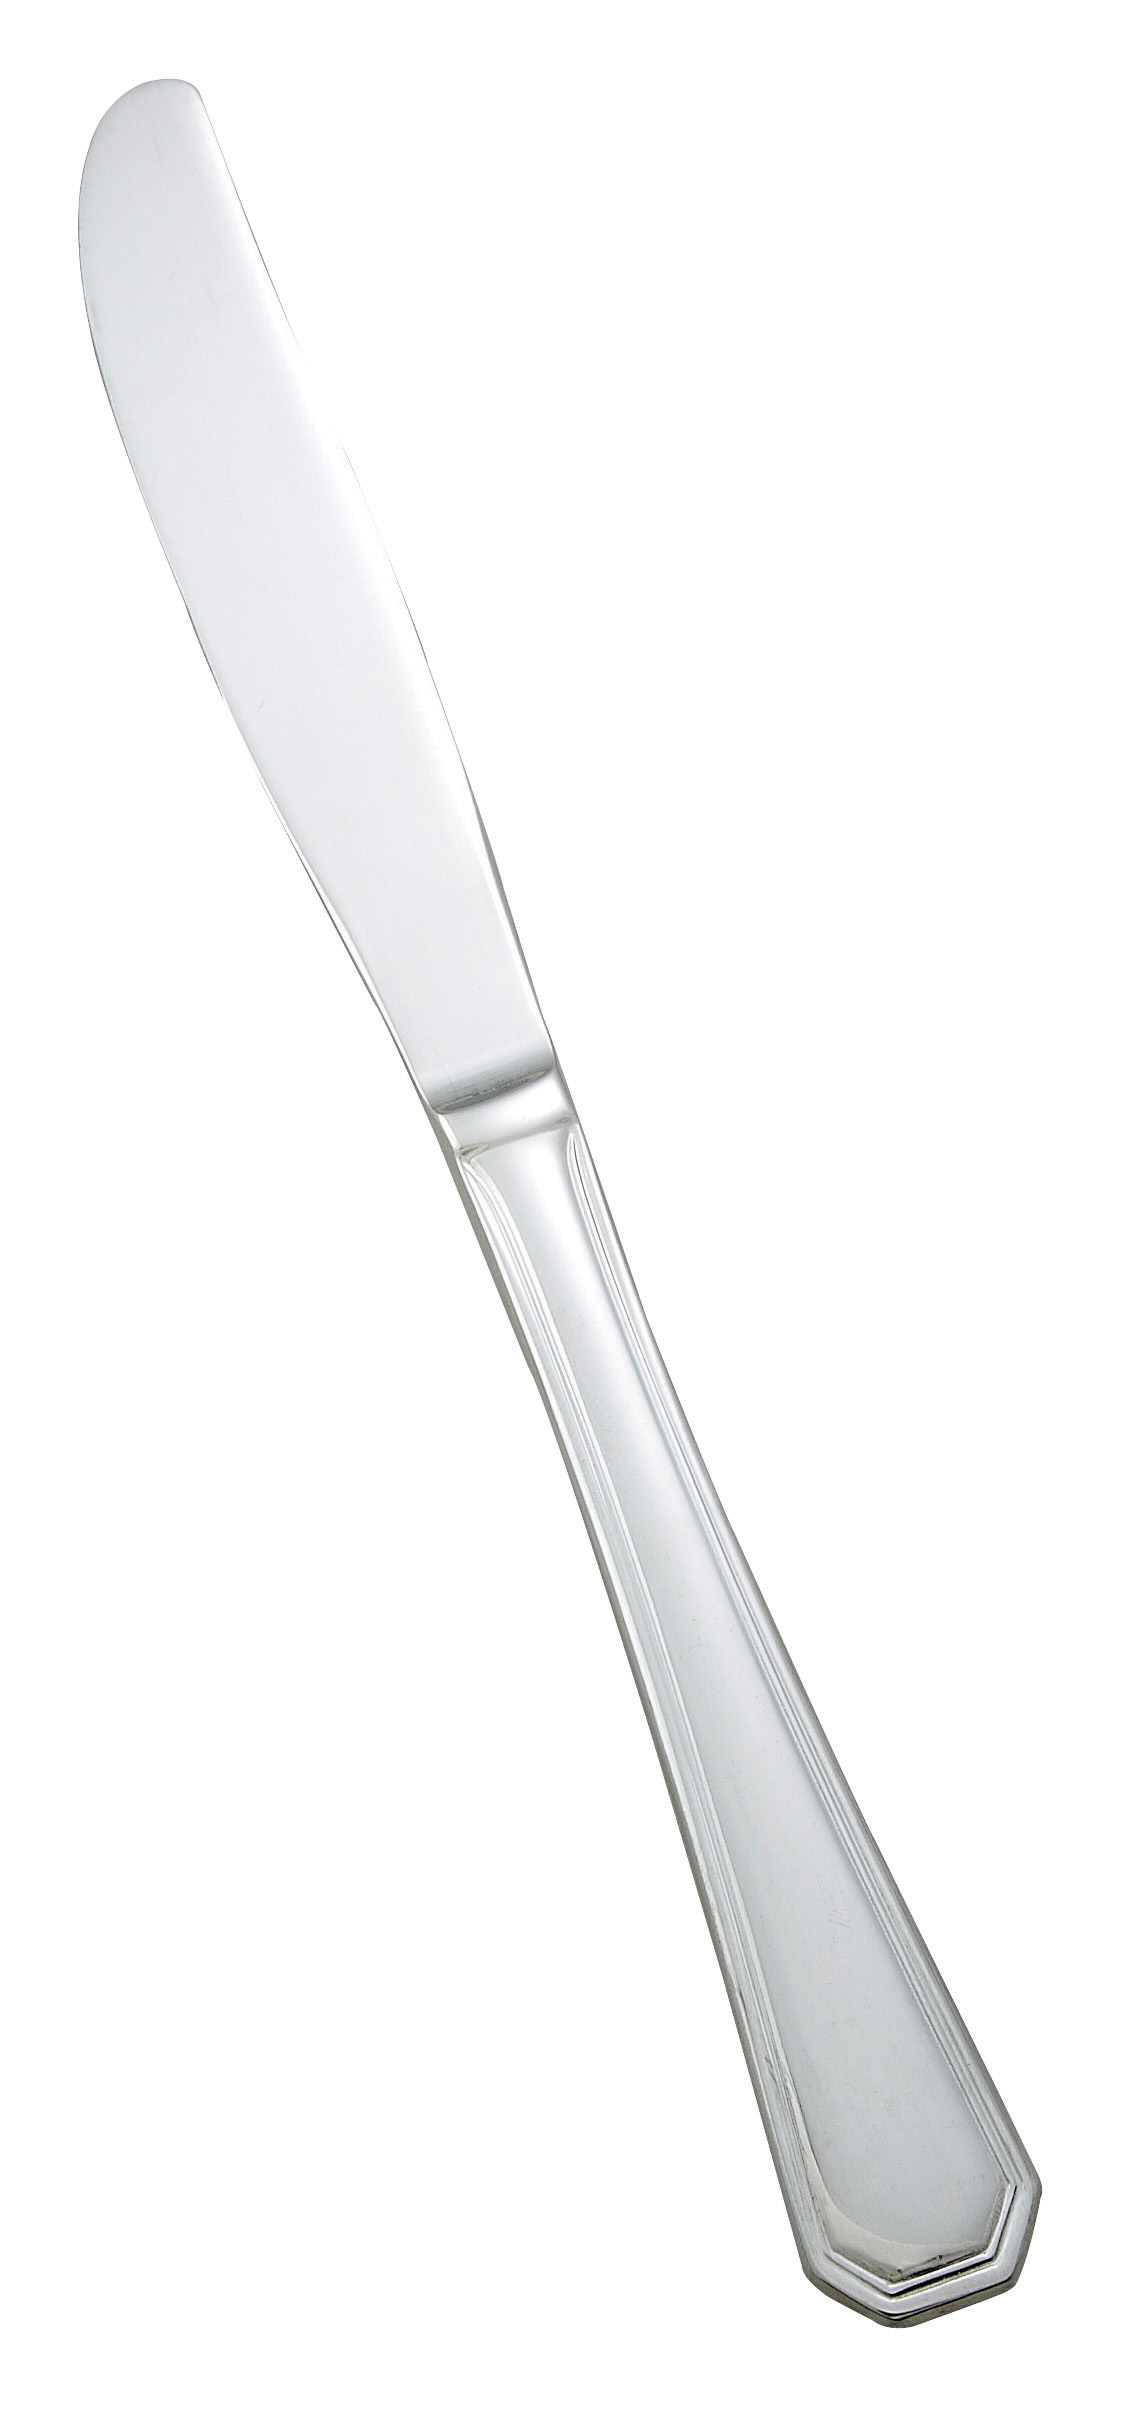 Dinner Knife, 18/8 stainless steel, extra heavy weight,